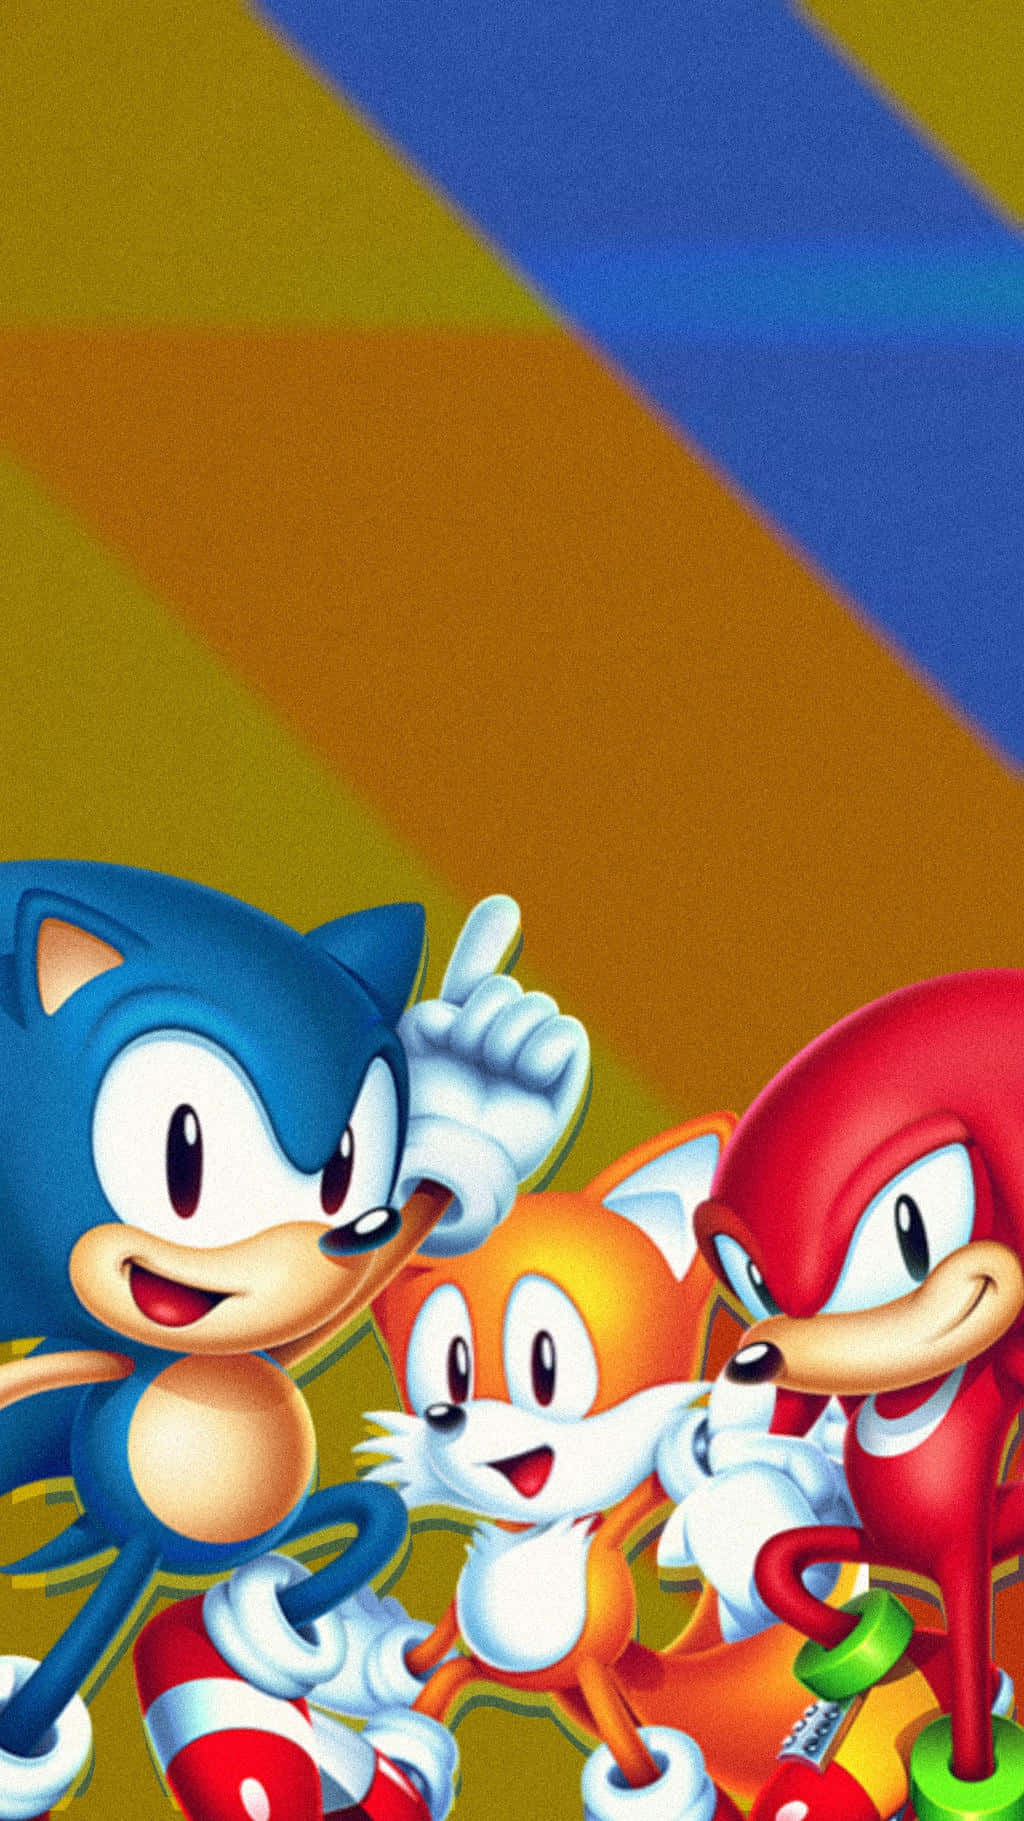 “Take your retro gaming to the next level with Sonic Mania!” Wallpaper